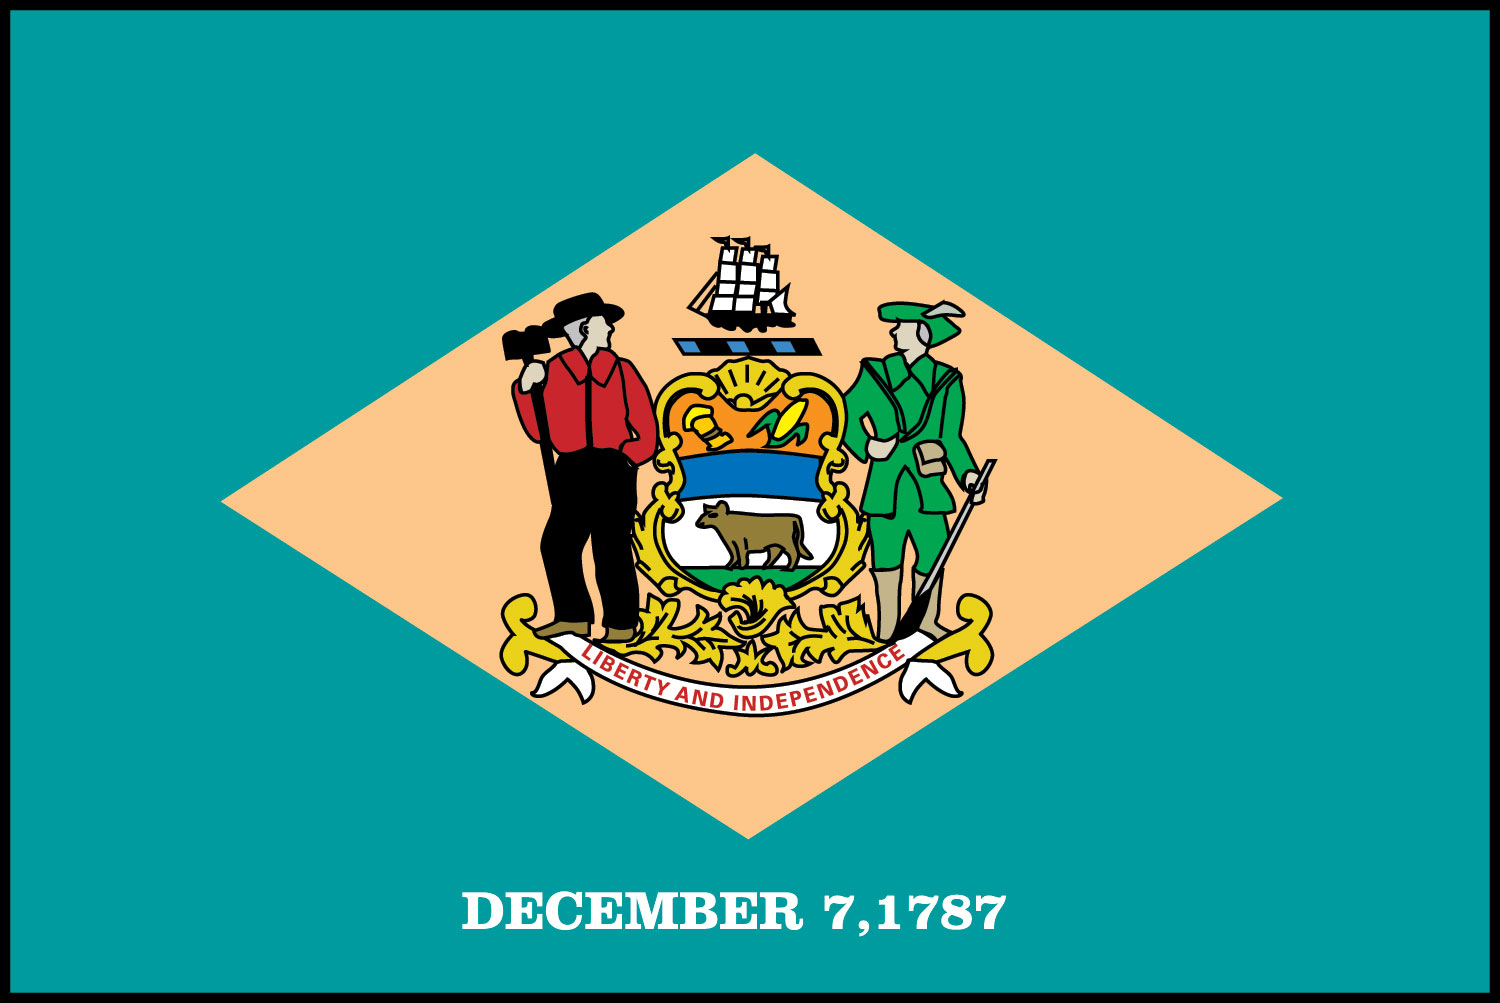 Delaware Prayer of the Day - Today's Prayer of the Day focuses on the state of Delaware. Let us keep Delaware in your prayer today. #Delaware #PrayeroftheDay